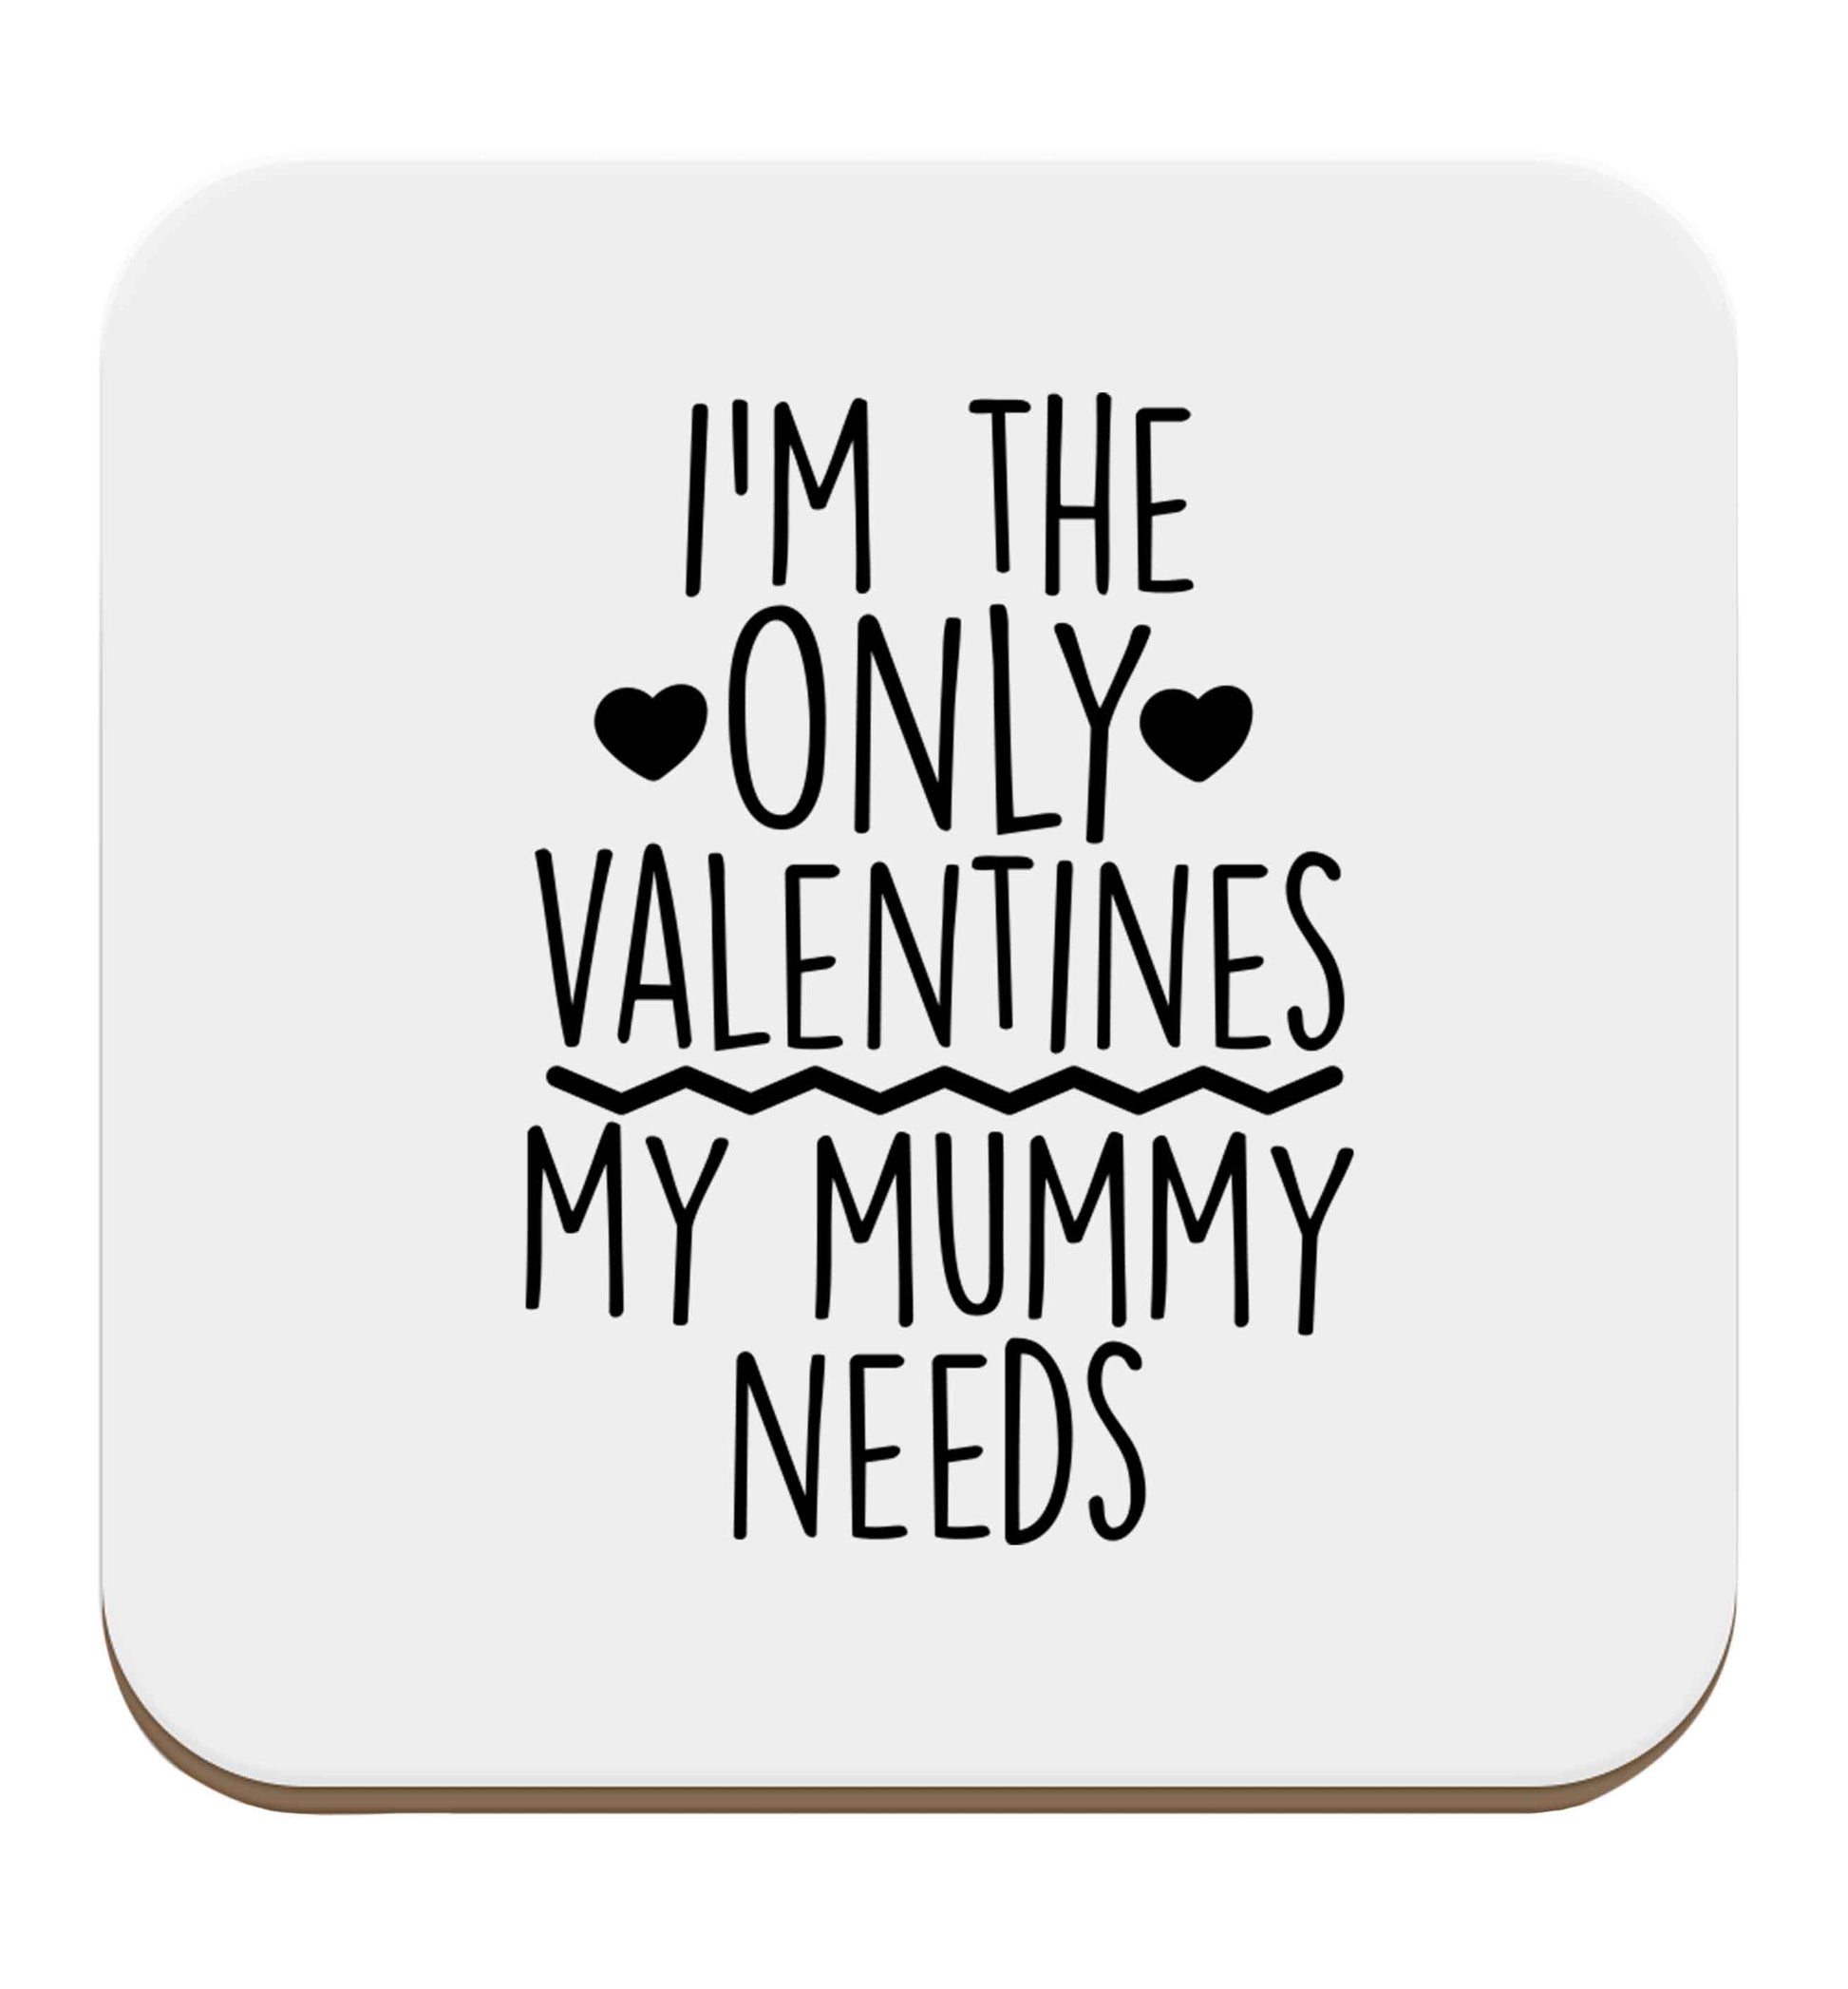 I'm the only valentines my mummy needs set of four coasters